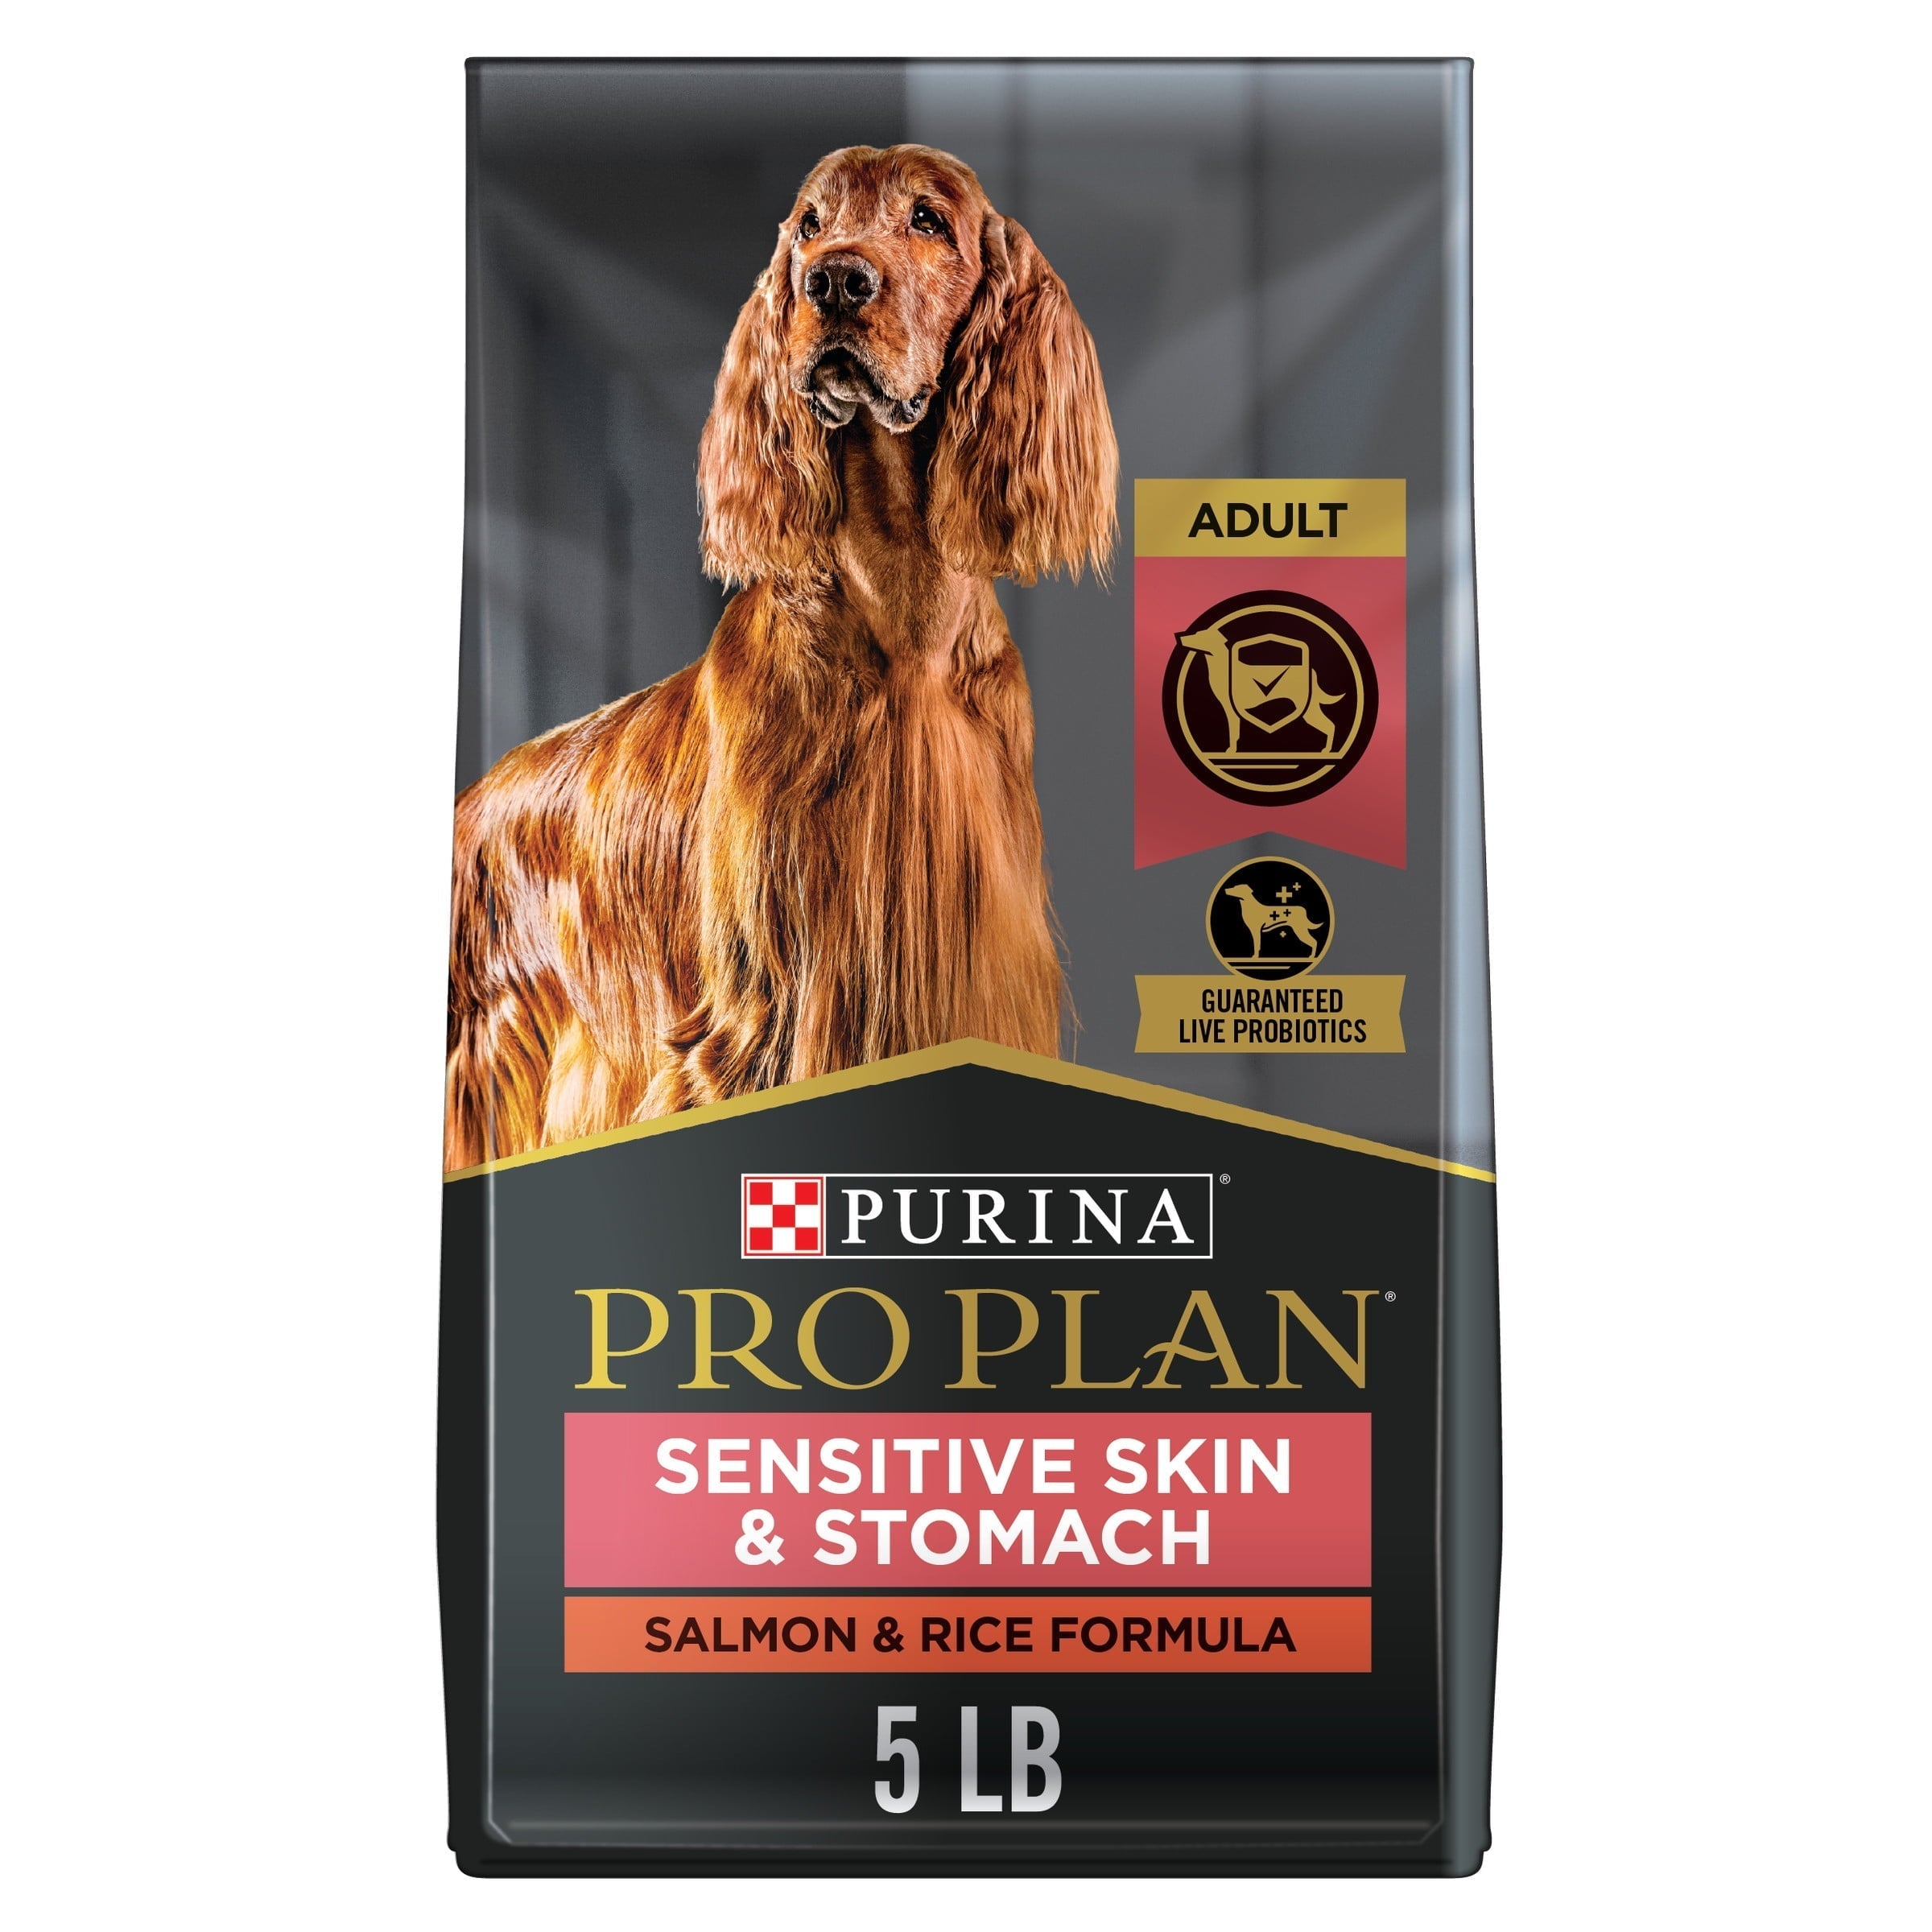 Wholesale prices with free shipping all over United States Purina Pro Plan Sensitive Skin and Stomach Dog Food With Probiotics for Dogs, Salmon & Rice Formula, 5 lb. Bag - Steven Deals